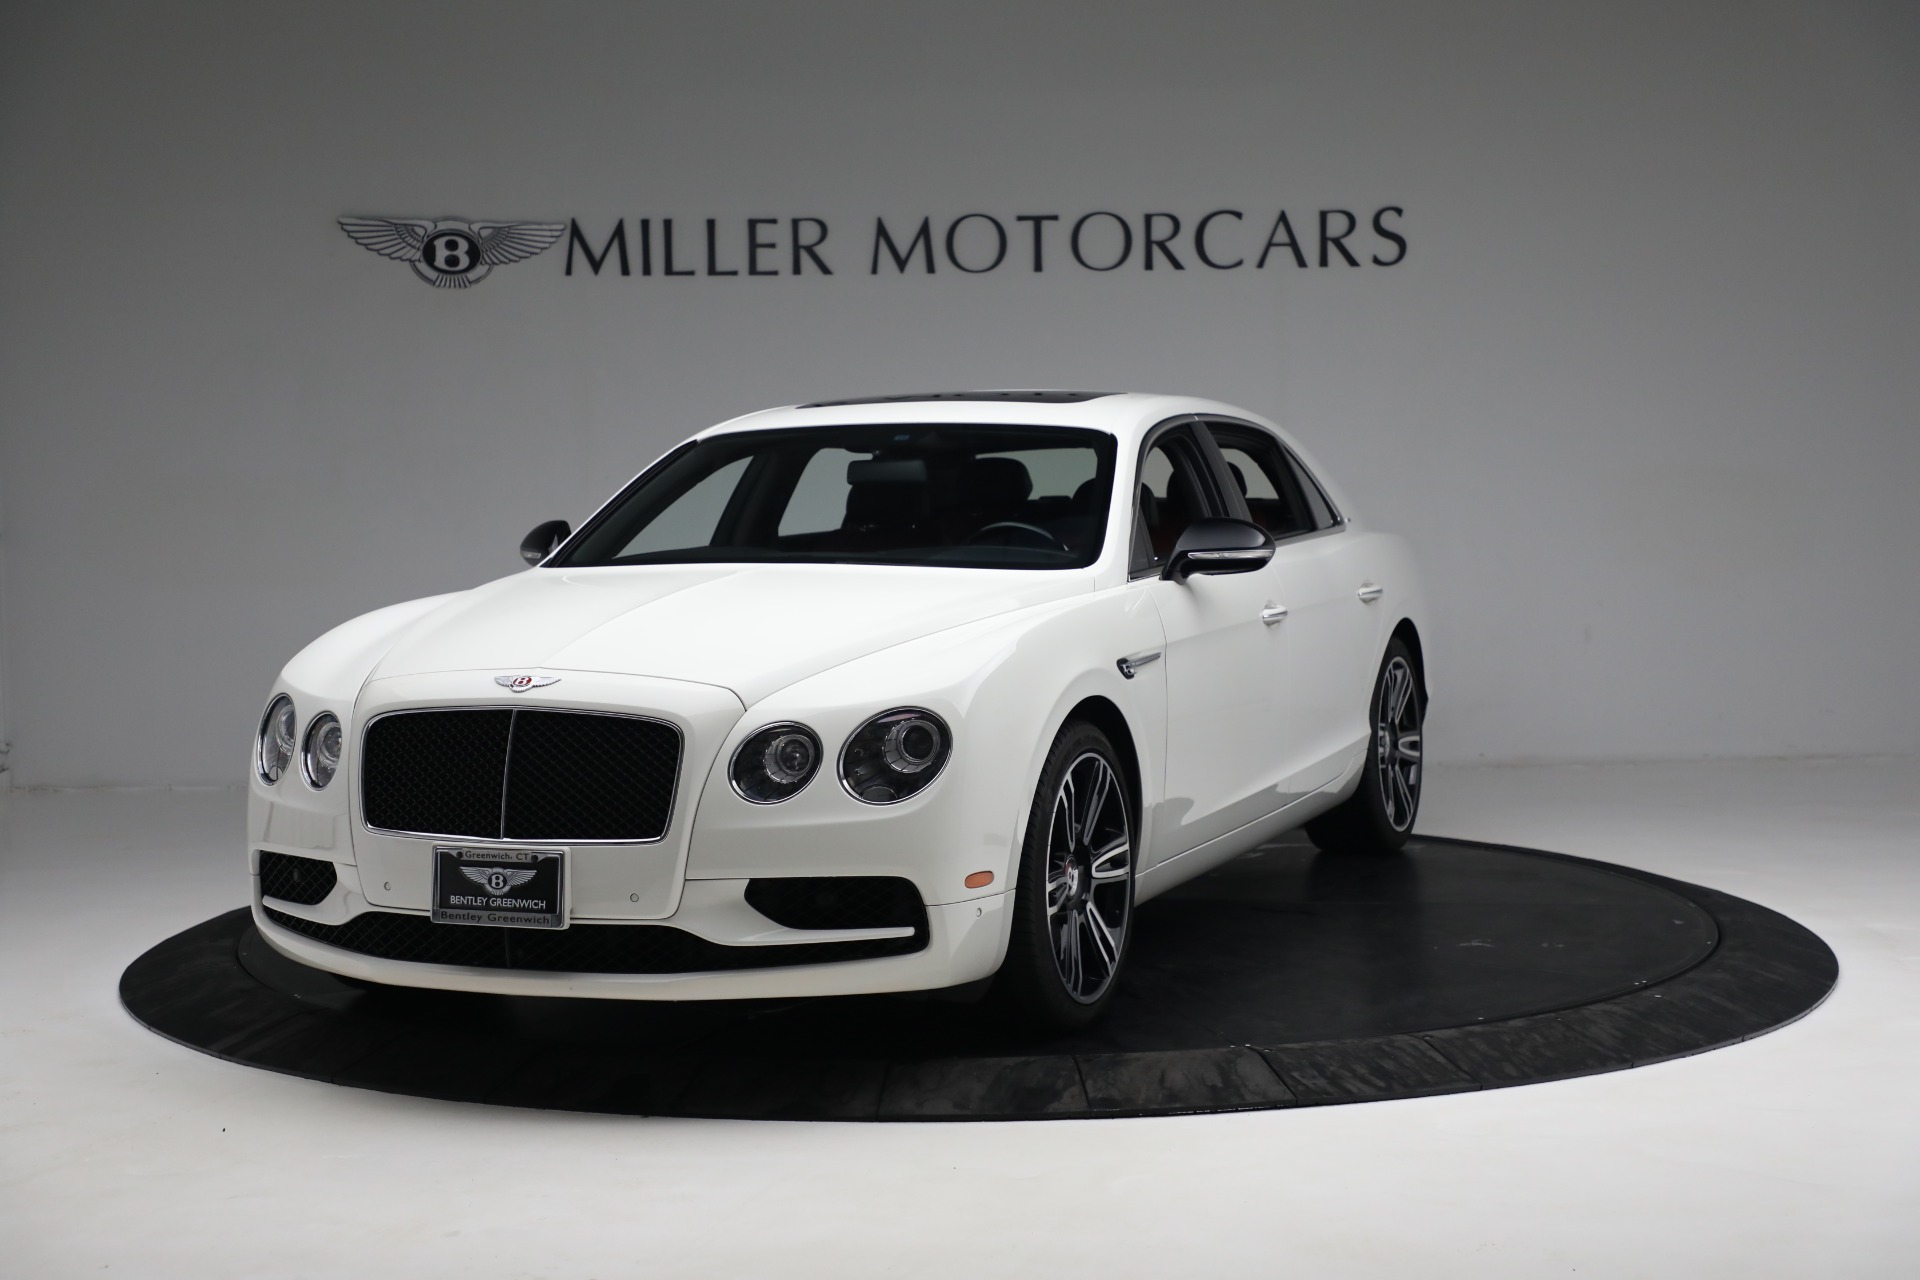 Used 2017 Bentley Flying Spur V8 S for sale Sold at Rolls-Royce Motor Cars Greenwich in Greenwich CT 06830 1